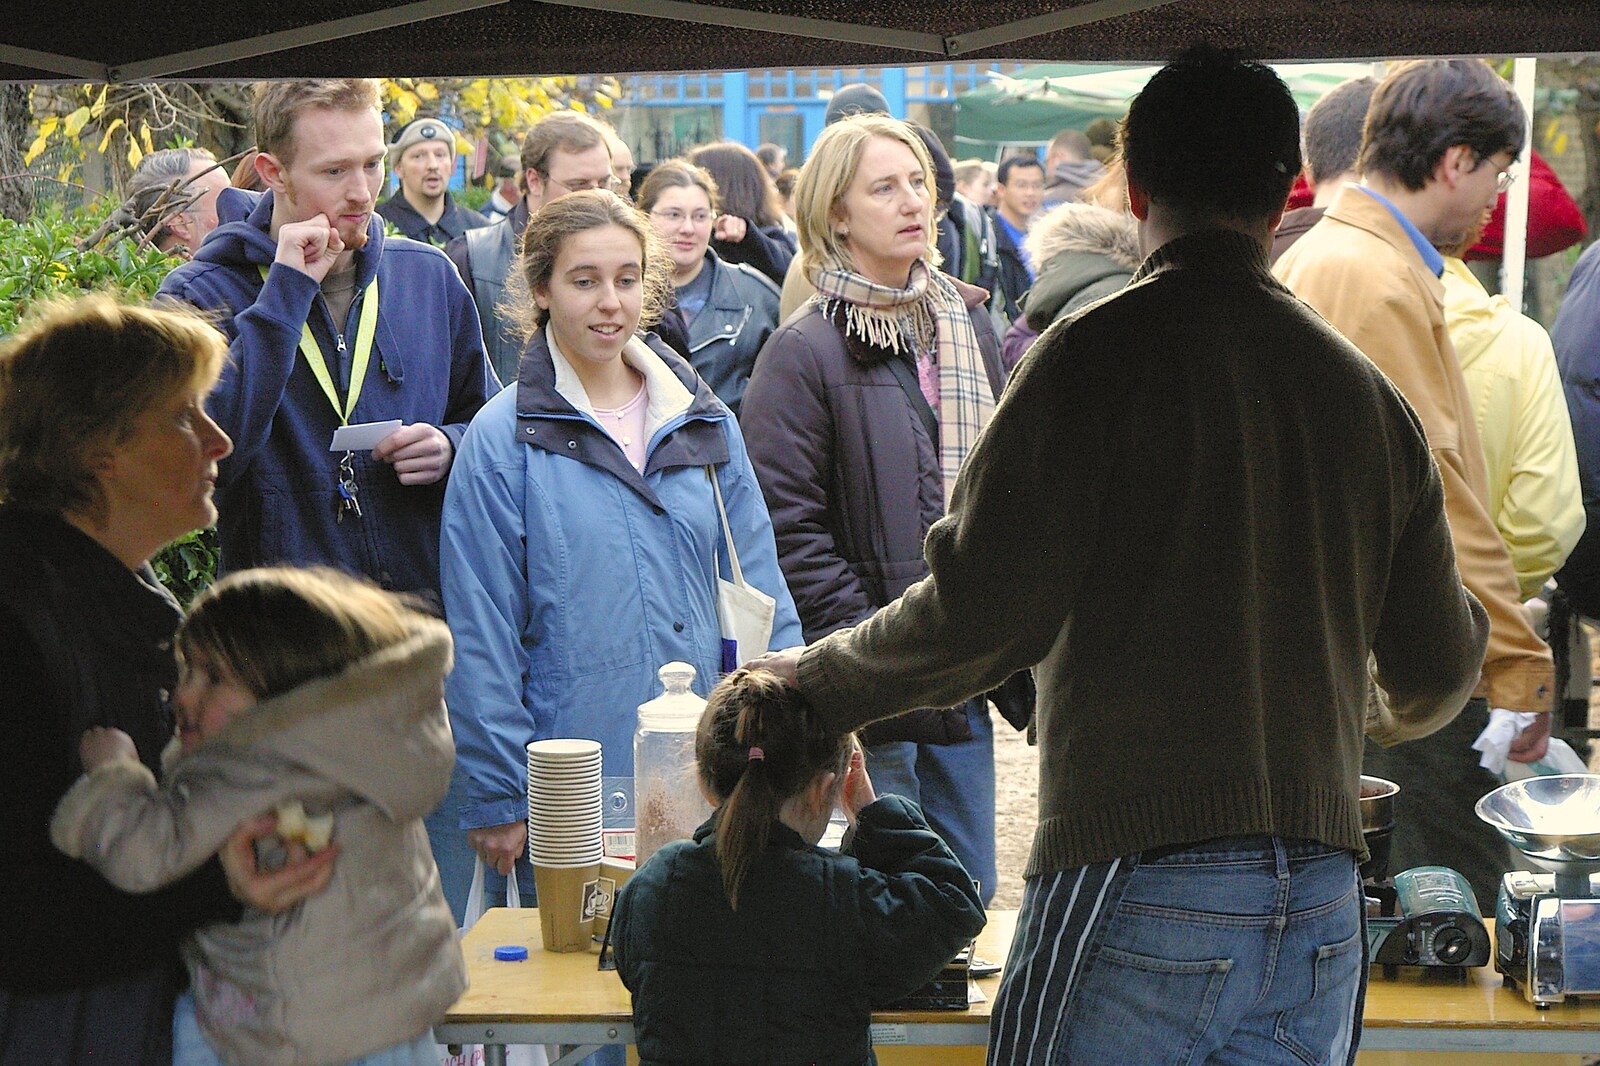 A view from behind a market stall from The Winter Fair, Mill Road, Cambridge - 2nd December 2006